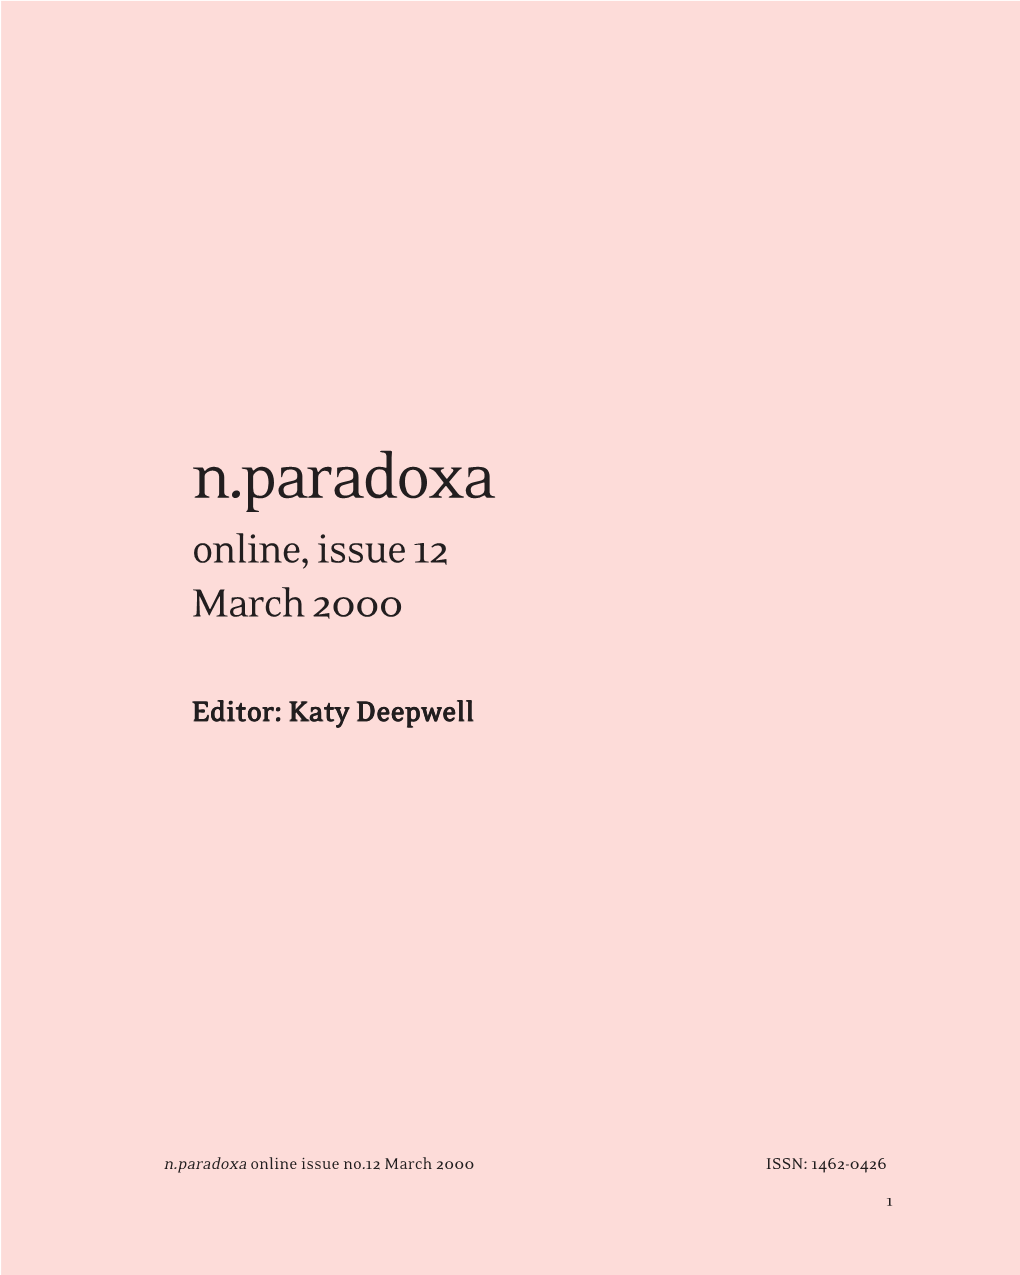 N.Paradoxa Online Issue 12, March 2000